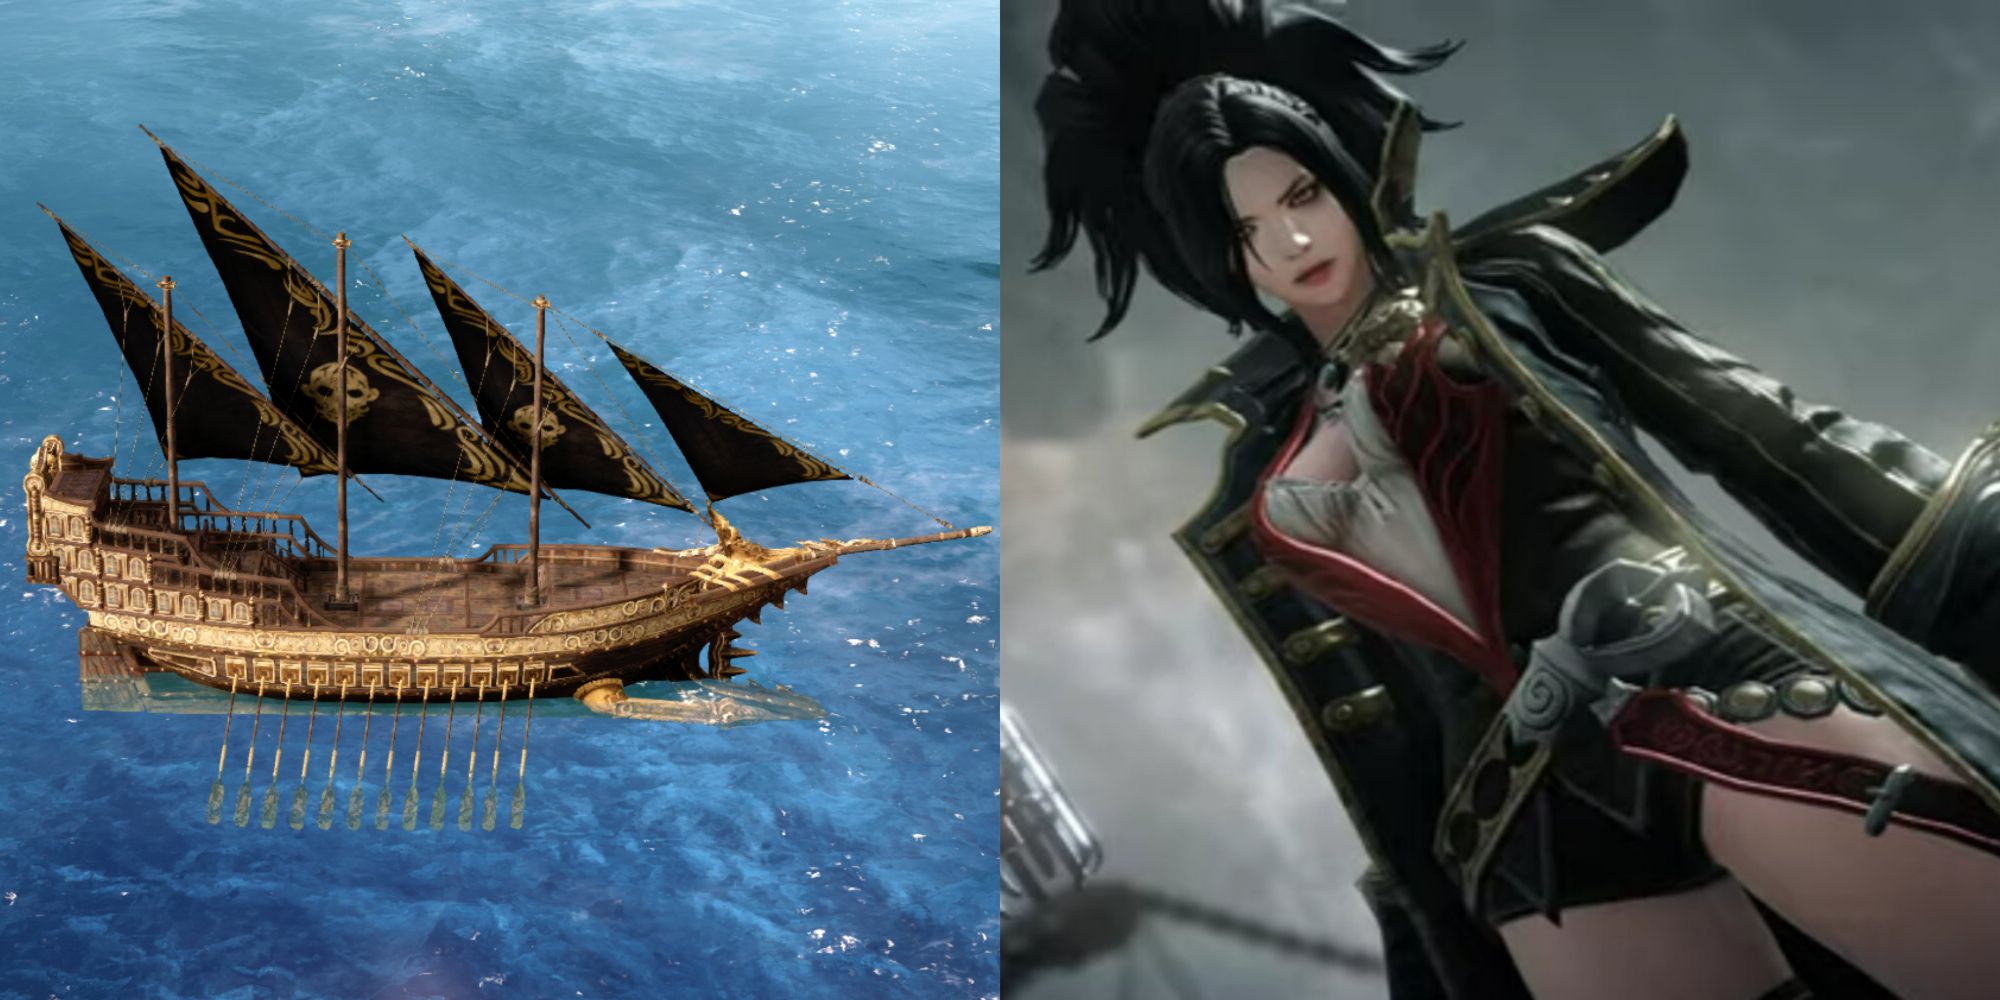 Lost Ark split image of Astray (ship) sailing on left and Blackfang on right.